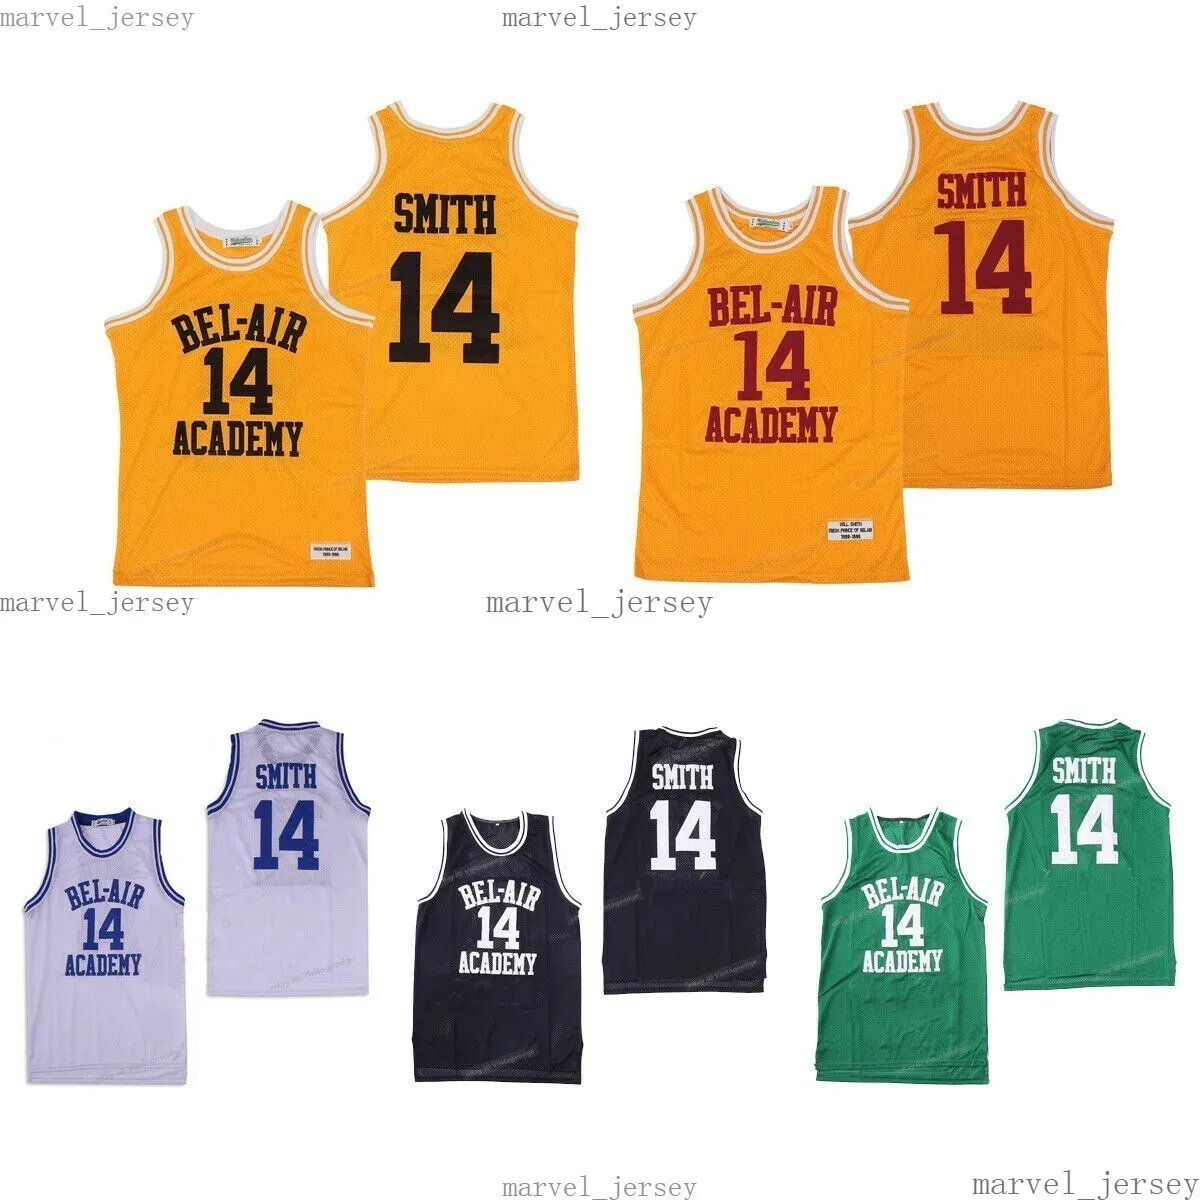 cheap Sewn Fresh Prince Of Bel Air Academy Will Smith #14 Basketball Jerseys 5 Colors MEN WOMEN YOUTH XS-5XL